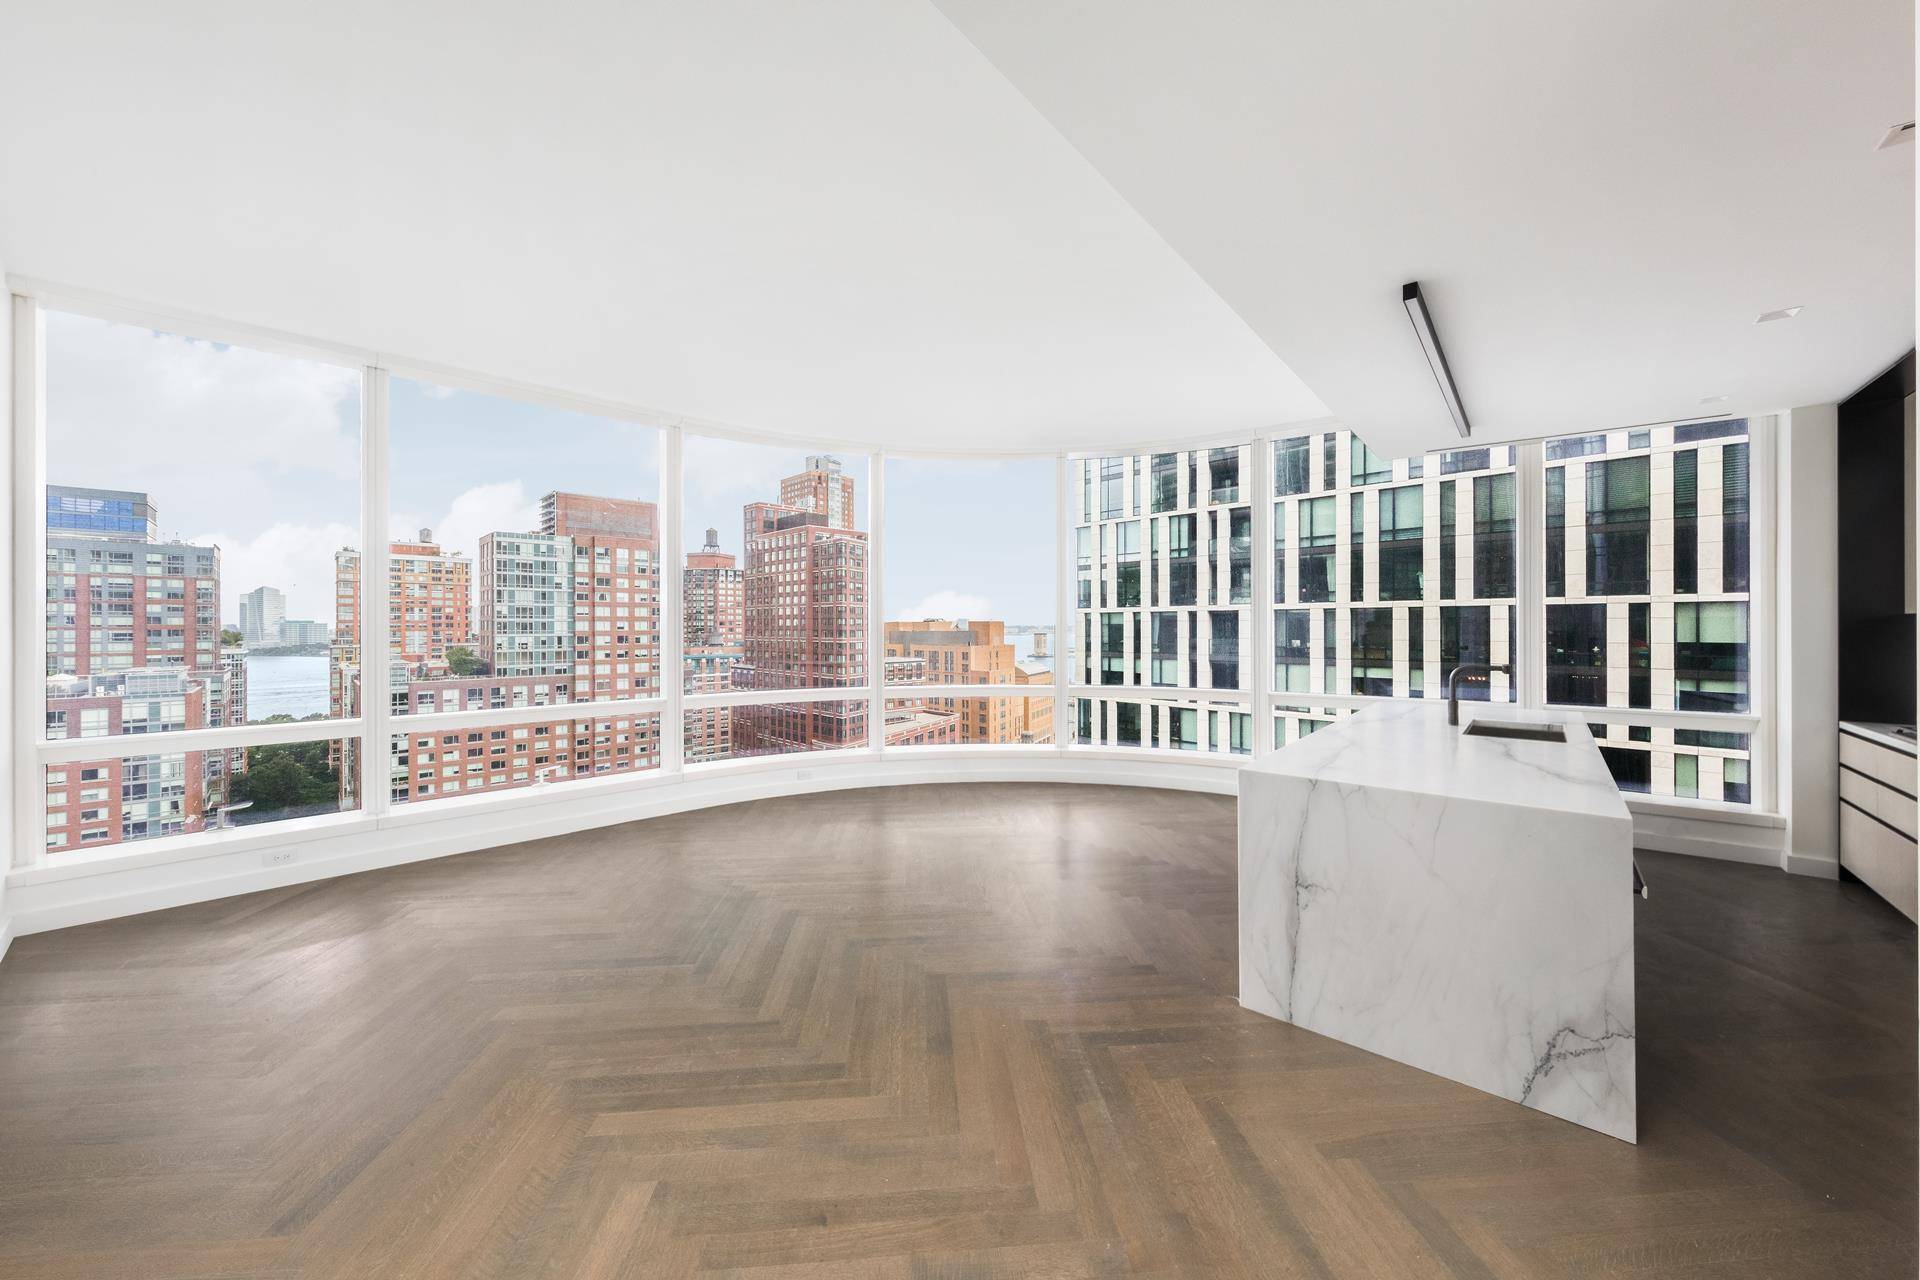 Experience luxury living at its finest in Tribeca's Crown Jewel, the 111 Murray Street Condominium.